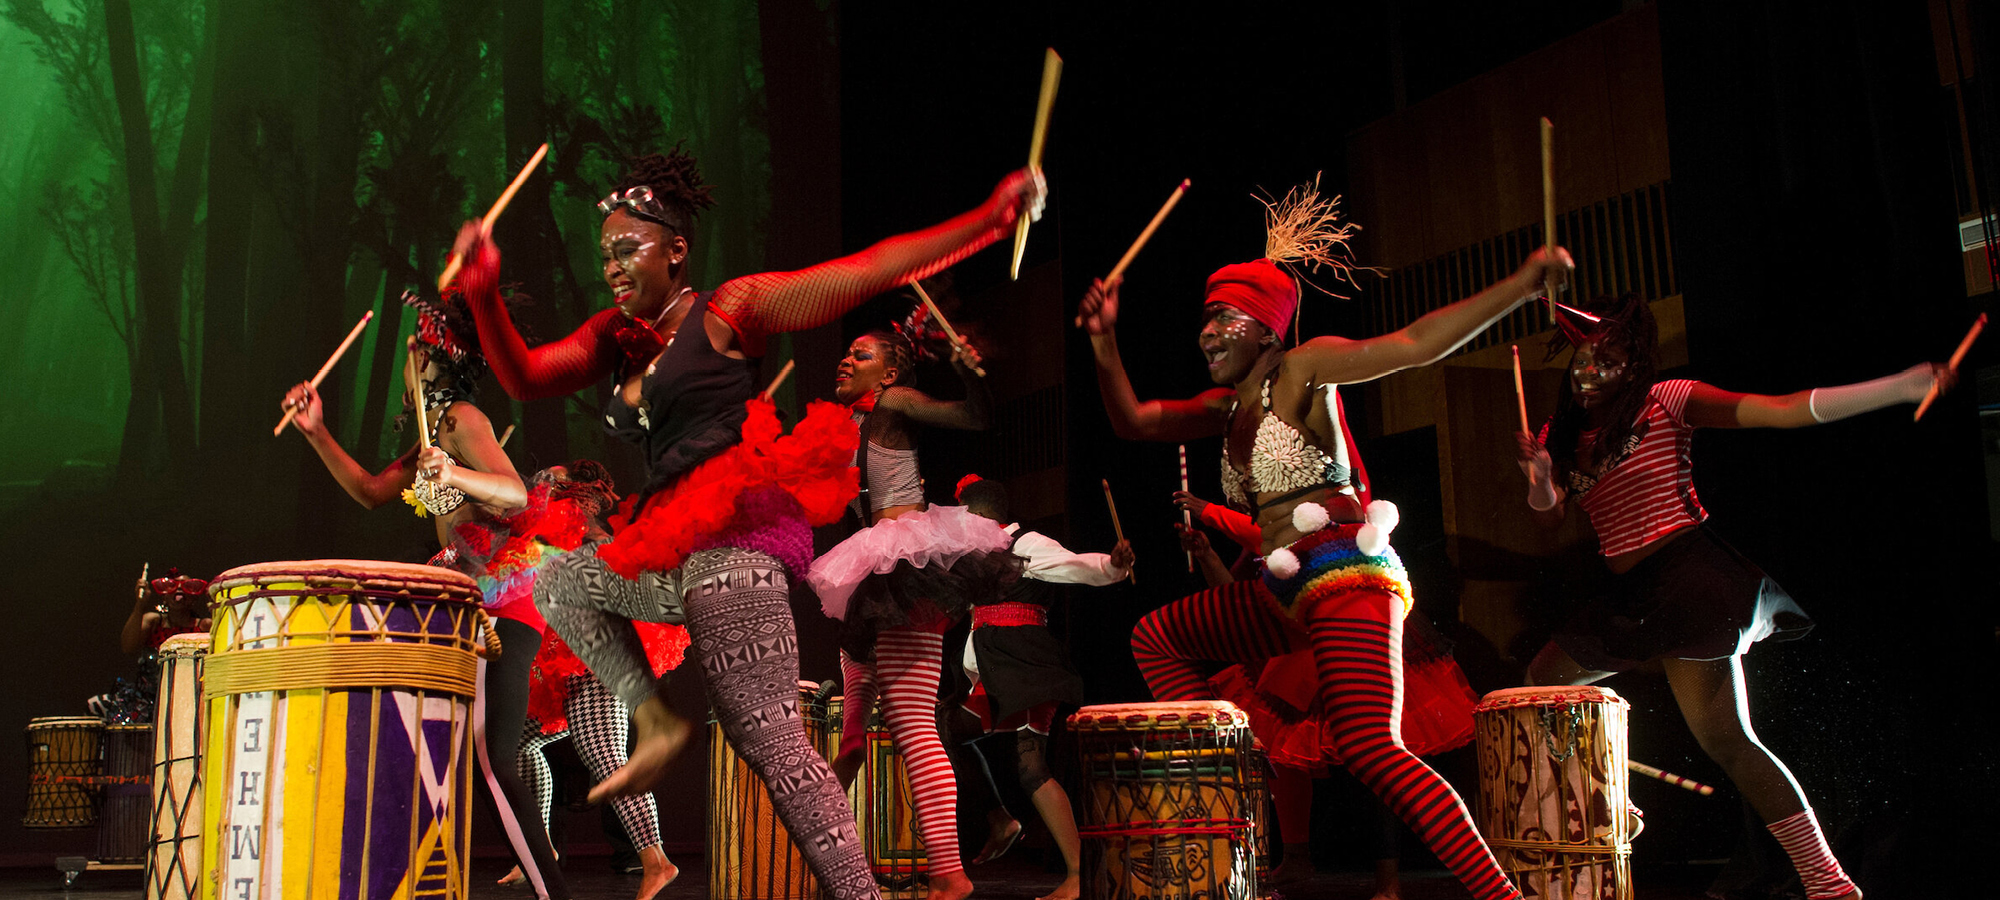 A performance of the Ayodele Drum & Dance company